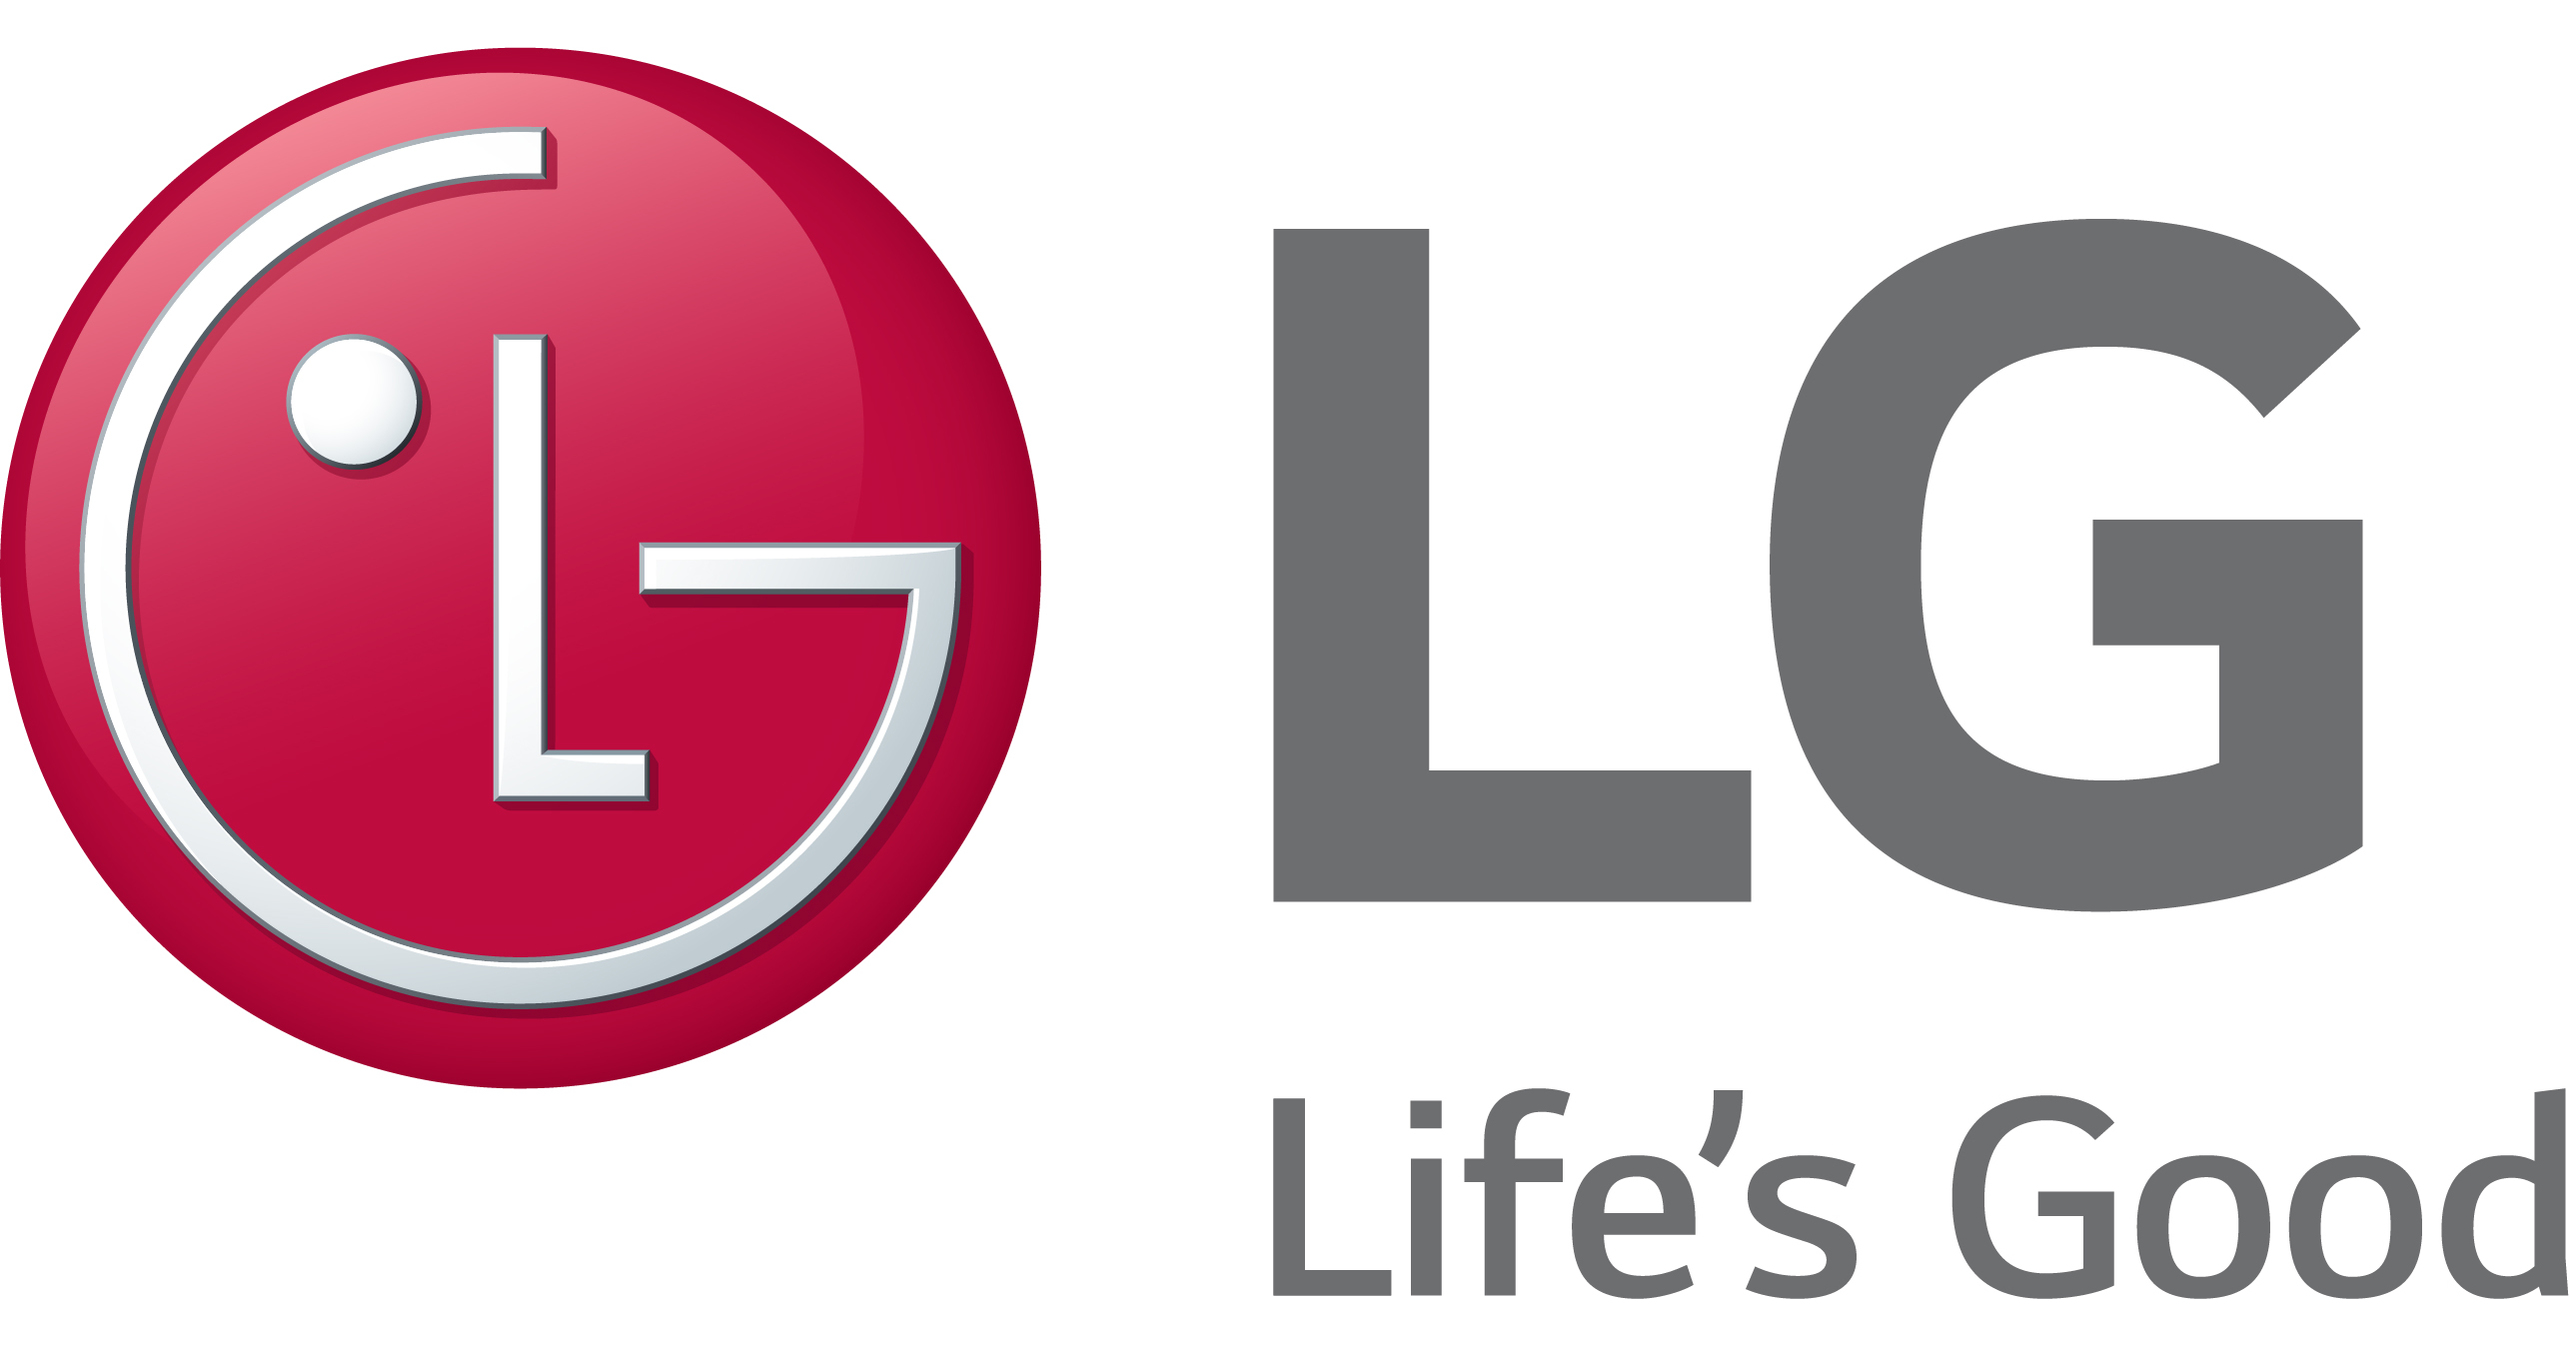 lg nova selects companies, entrepreneurs for second annual mission for the future program